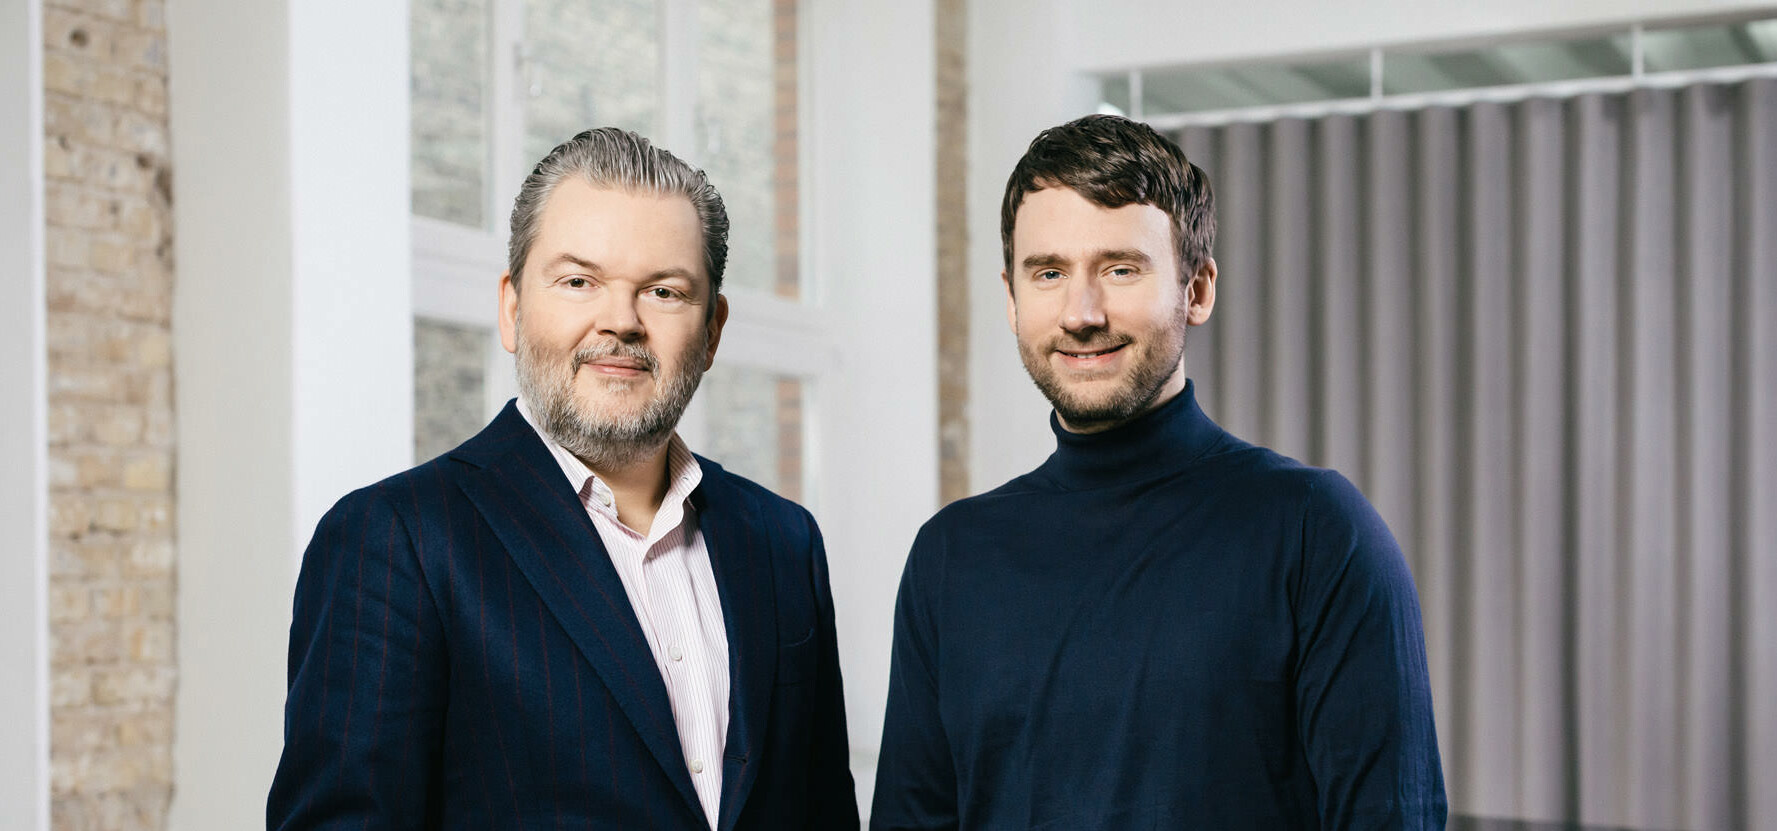 IDAGIO CEO & Founder Till Januczukowicz and Co-founder Christoph Lange